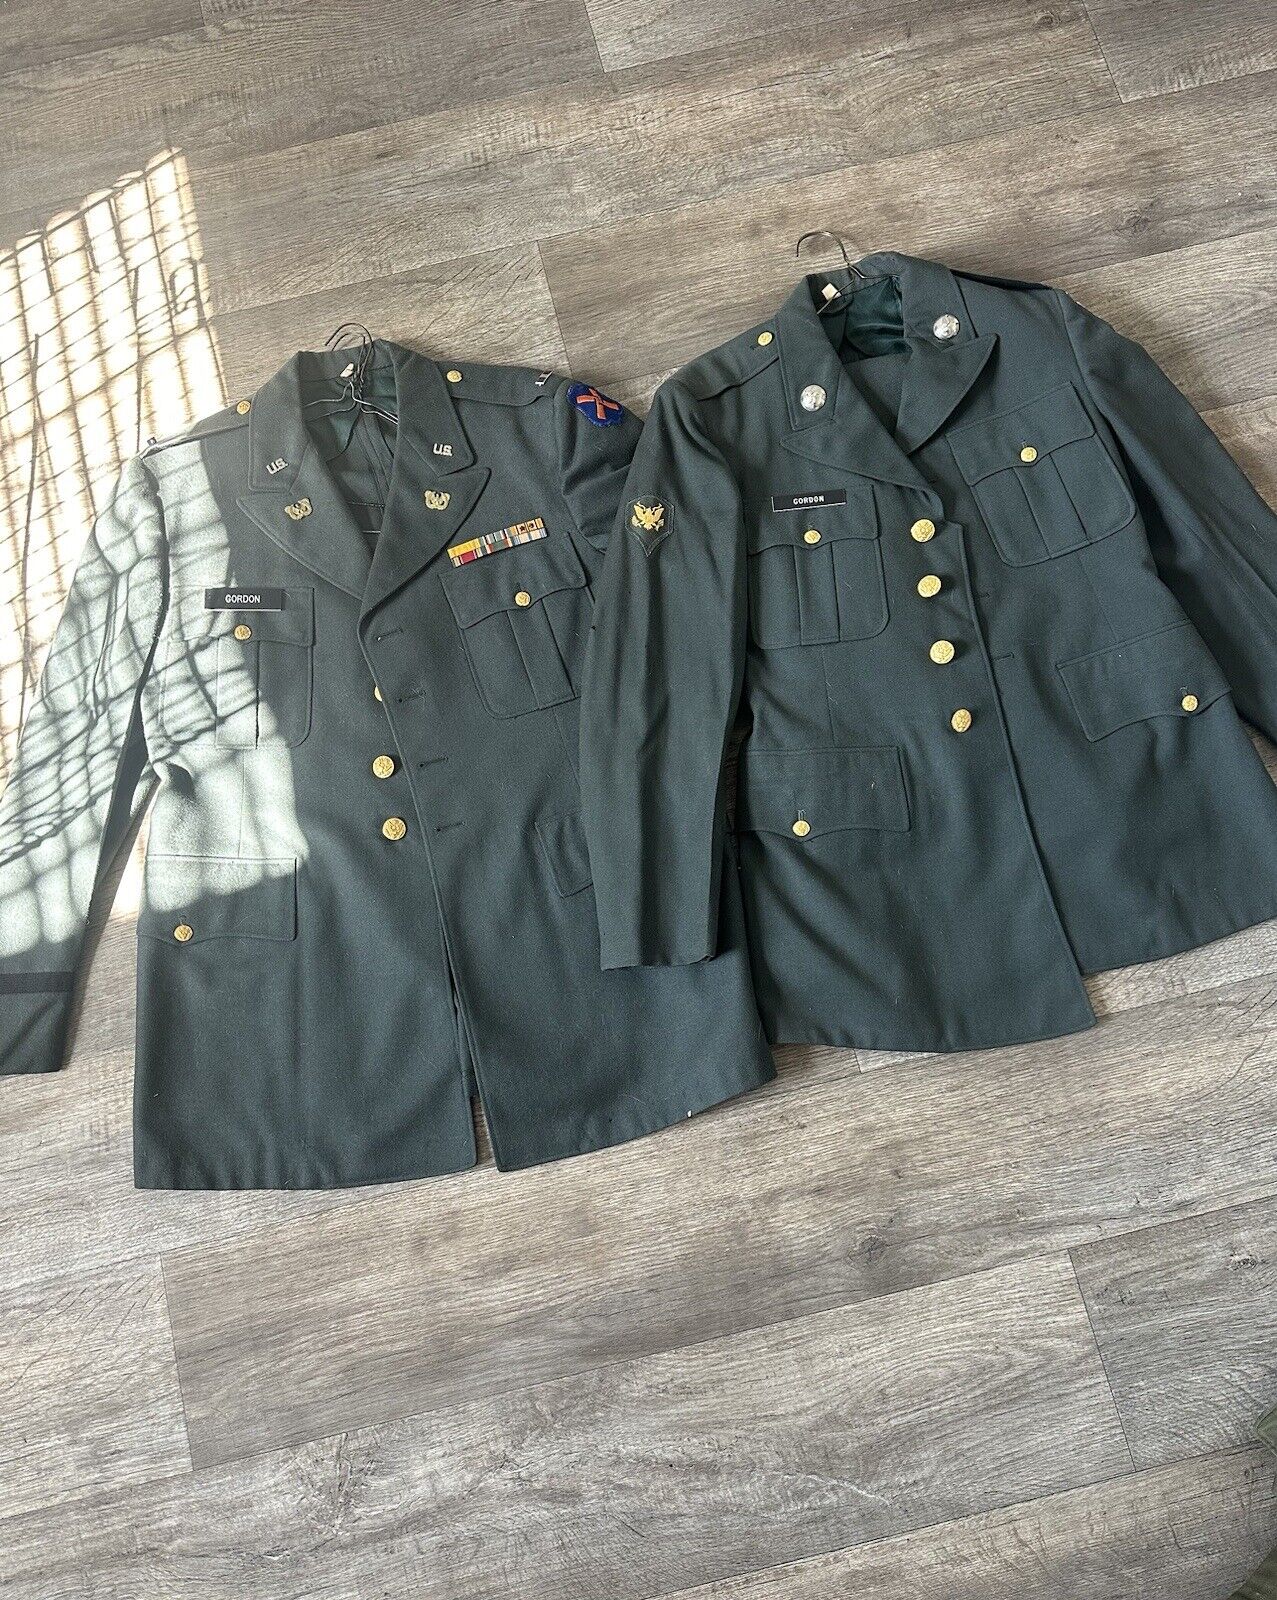 Two WW2 US Army Wool Dress Coats - 12th Corps And 21st Corps / 46L And 38R